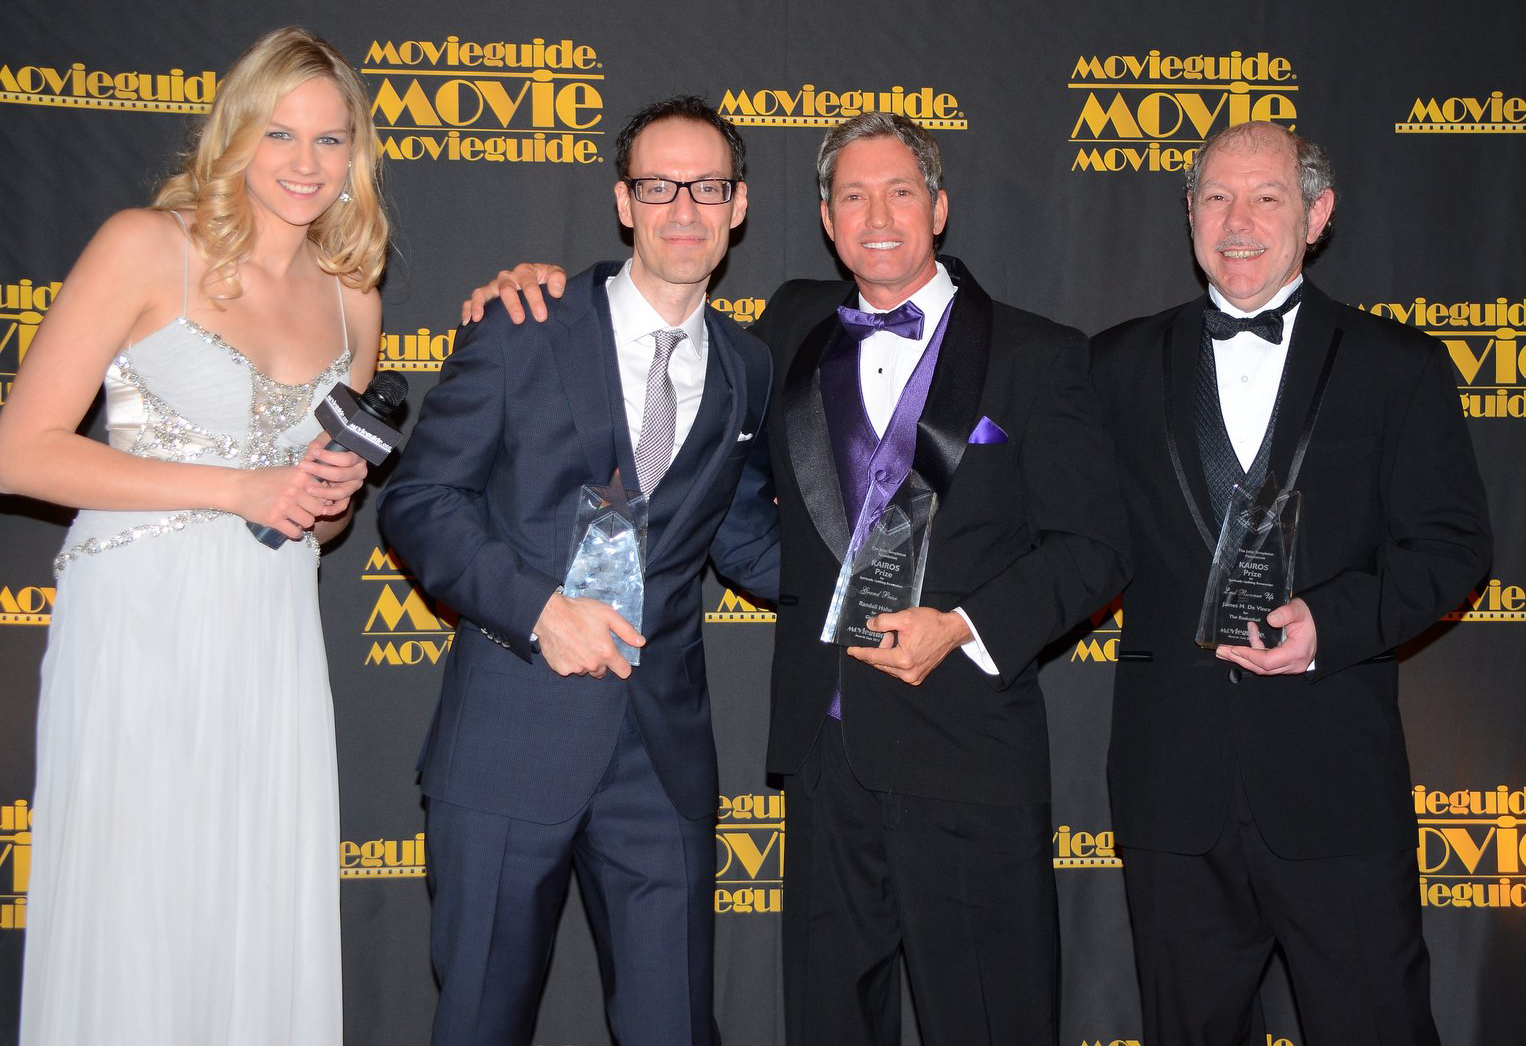 Evy Baehr interviewing Romeo Ciolfi, Randall Hahn, and James M. De Vince at the MovieGuide Awards 2013.